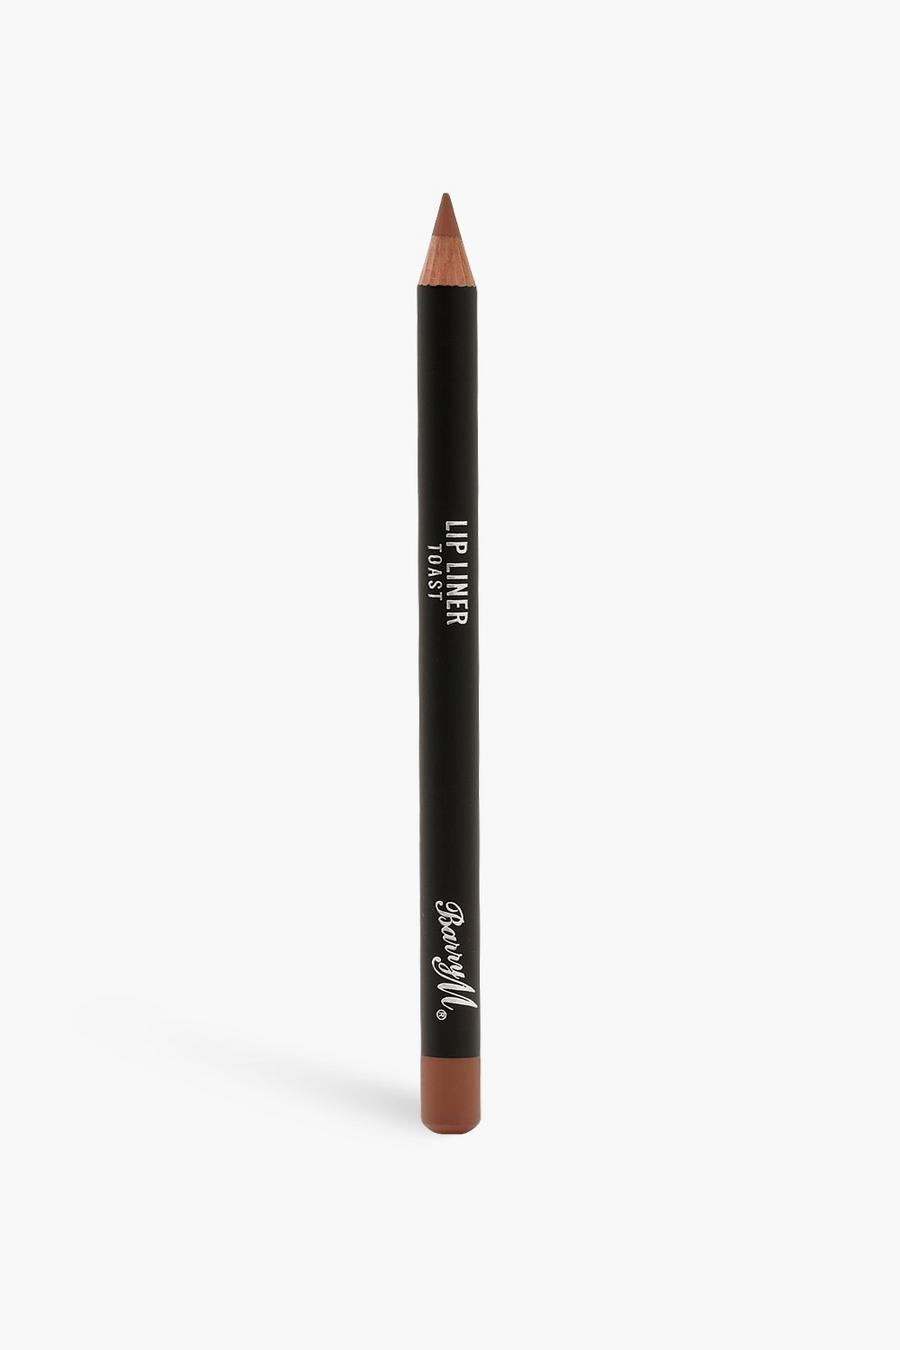 Nude Barry M Lip Liner - Toast image number 1